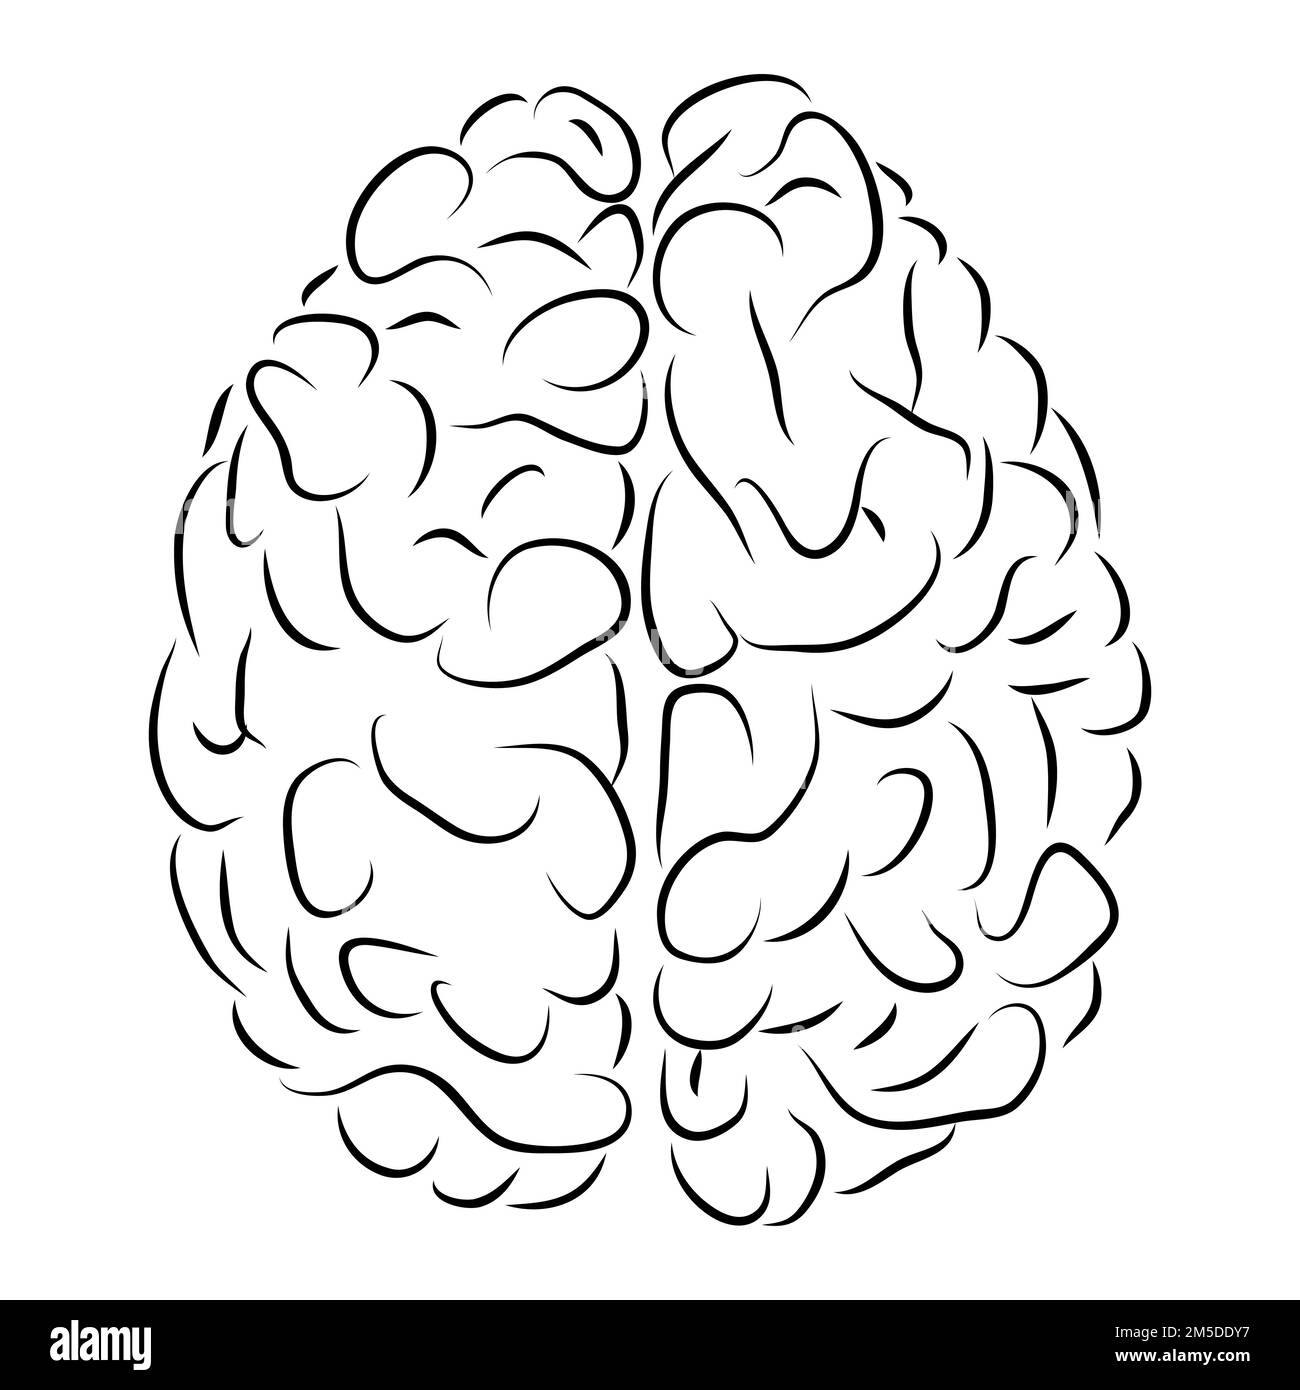 Top view of the human brain in black and white. The concept of anatomy. Stock Vector